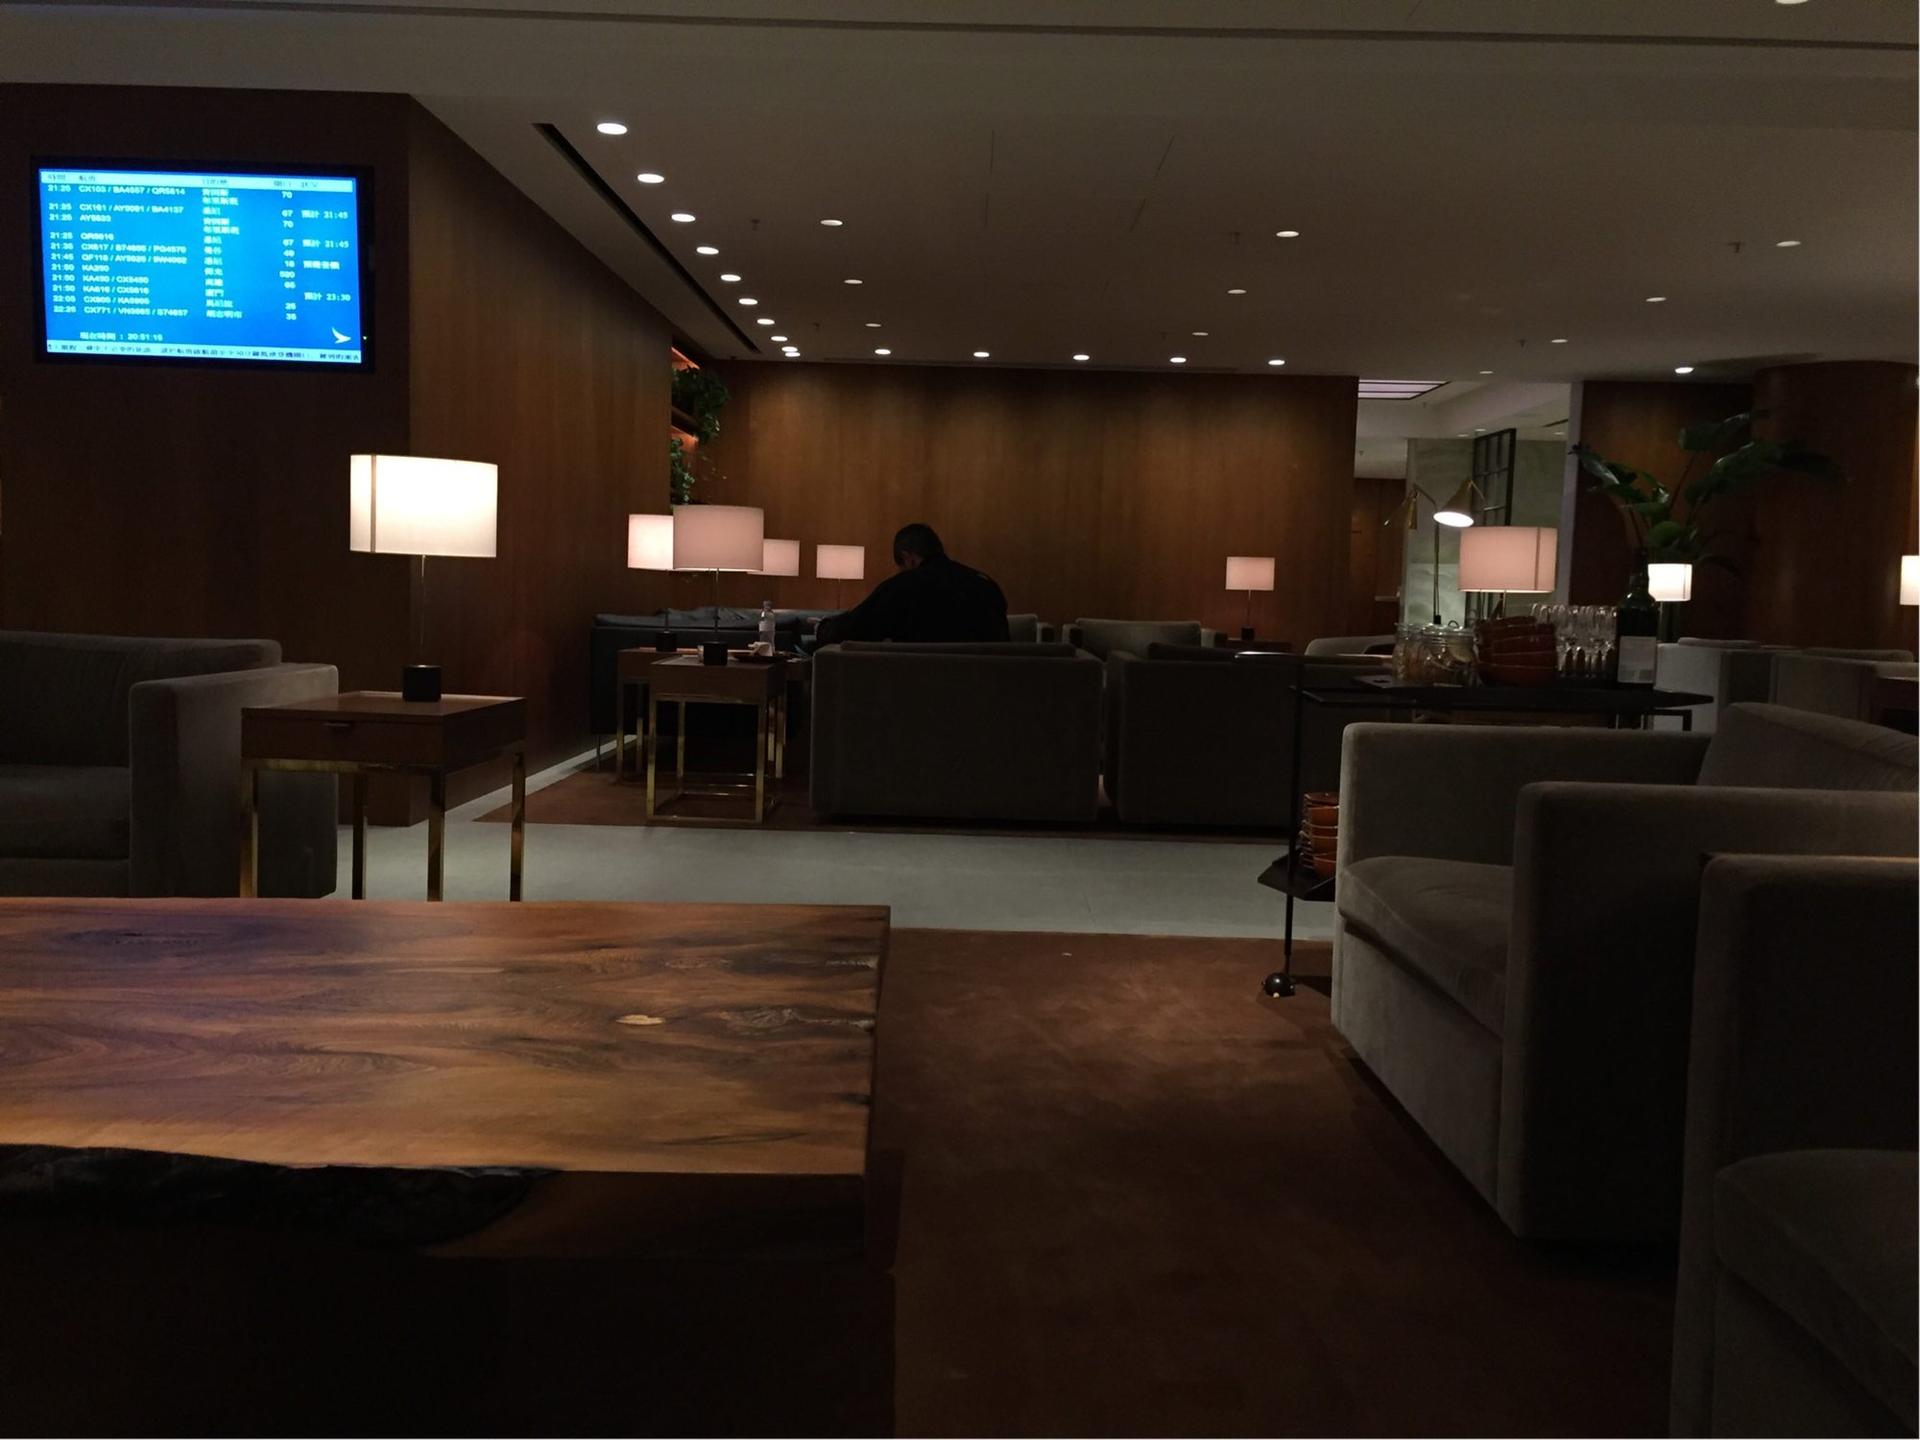 Cathay Pacific The Pier First Class Lounge image 43 of 100